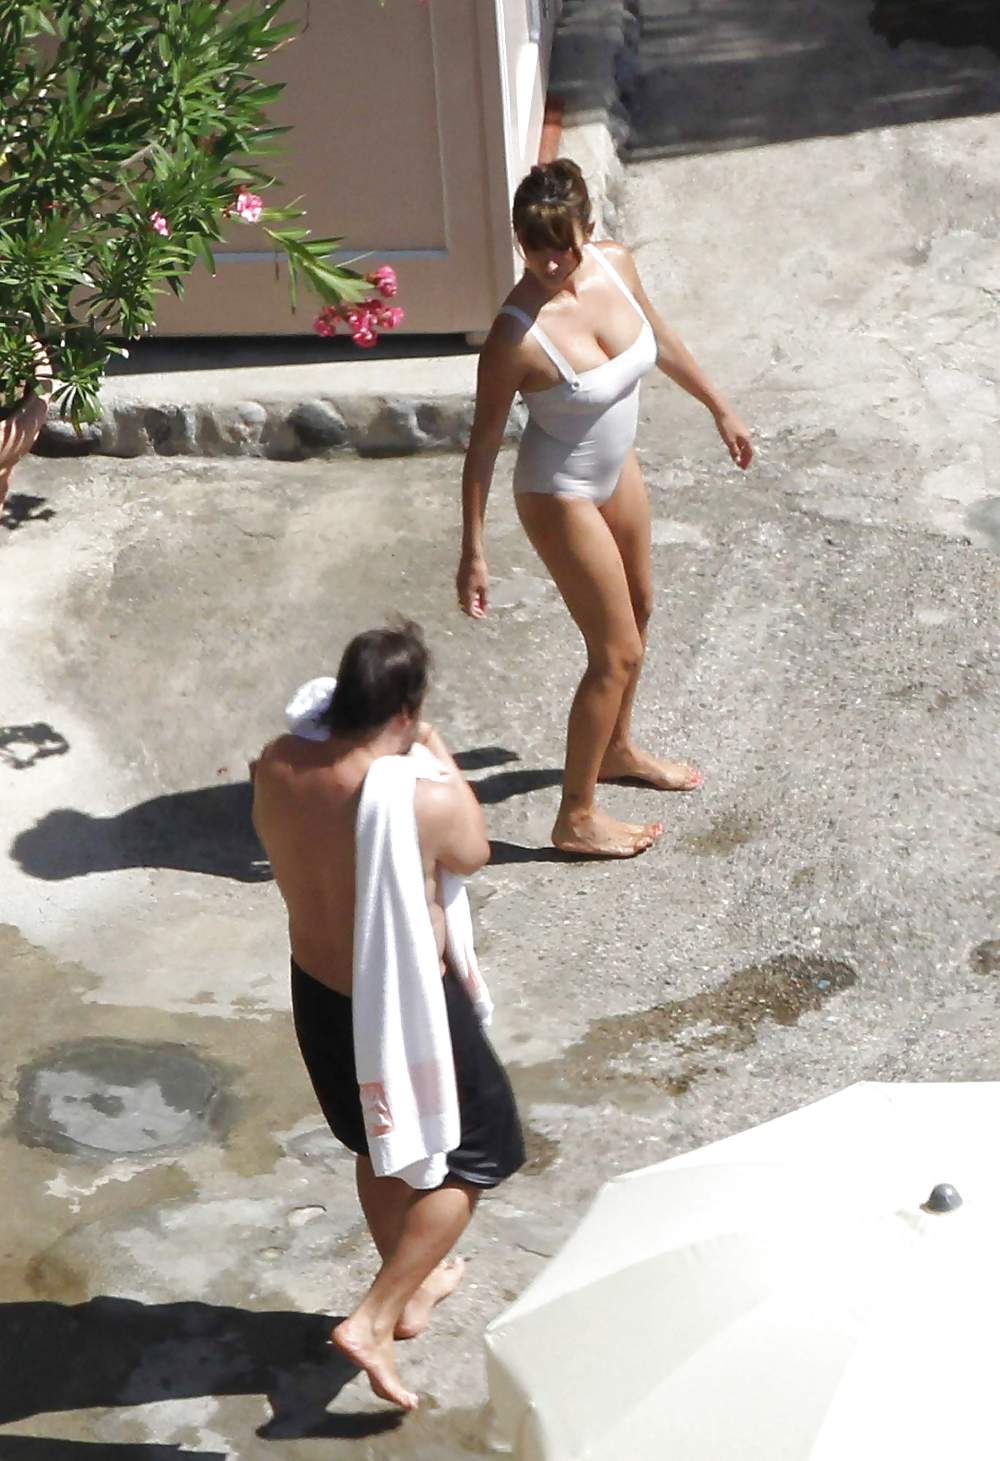 Penelope Cruz relaxing by the pool in a swimsuit #7586446